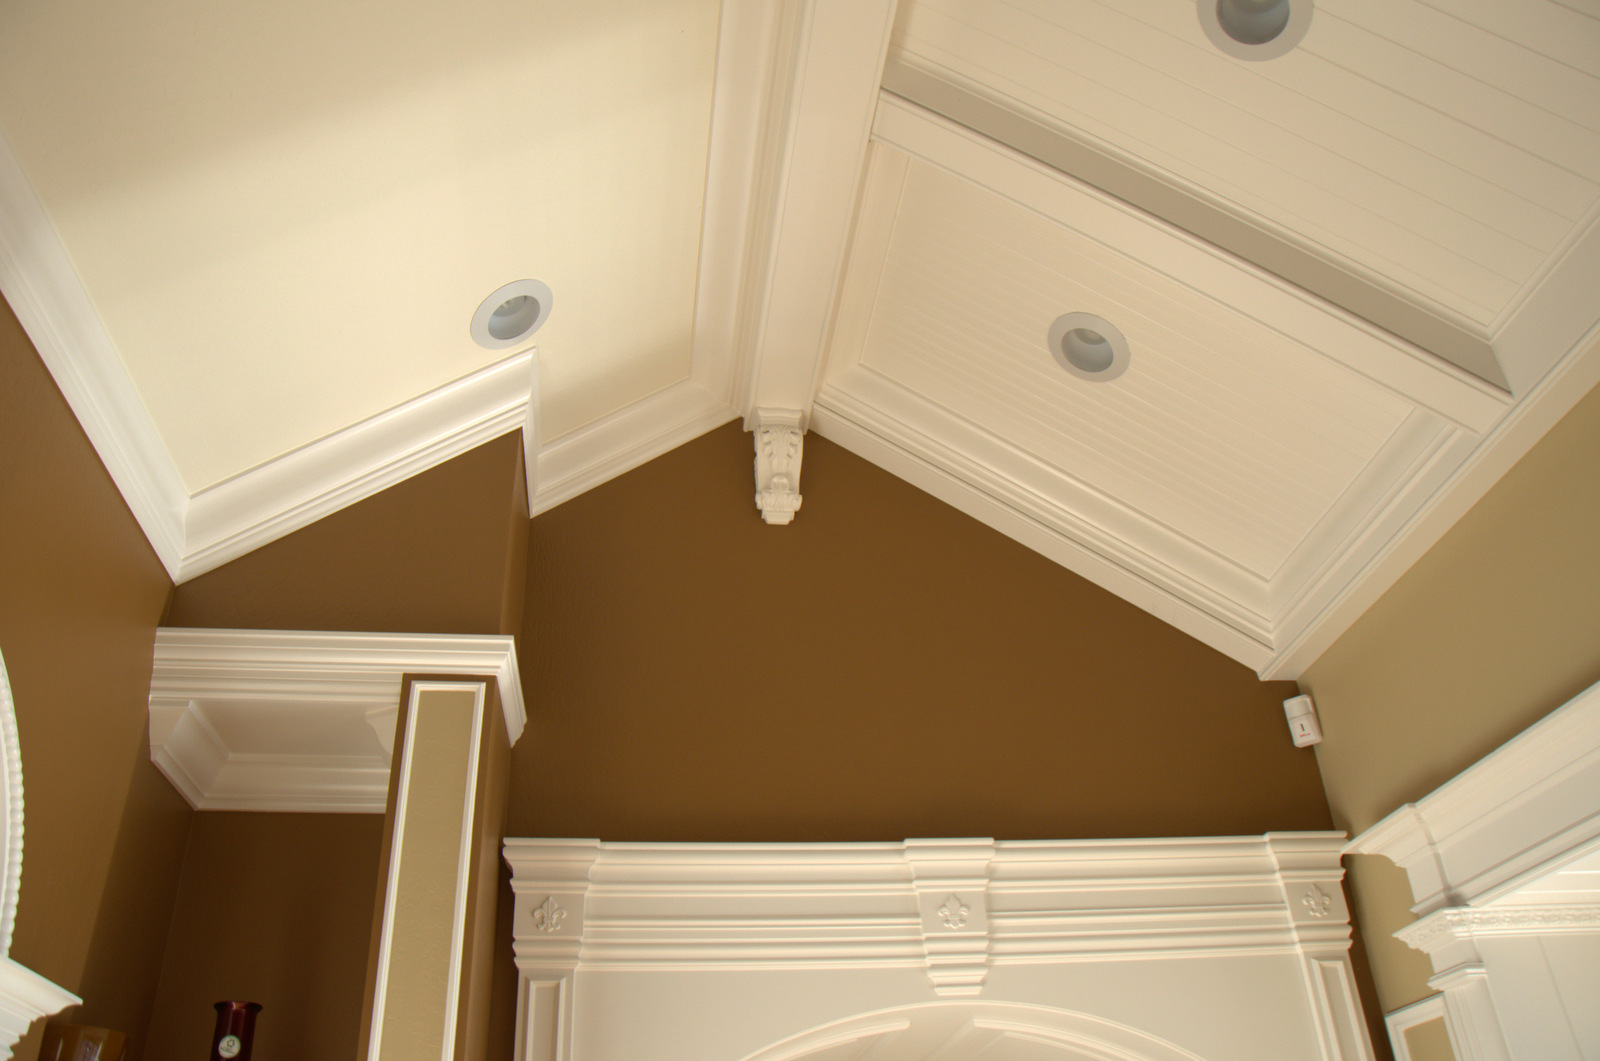 How To Put Crown Molding On Vaulted Ceiling Peatix